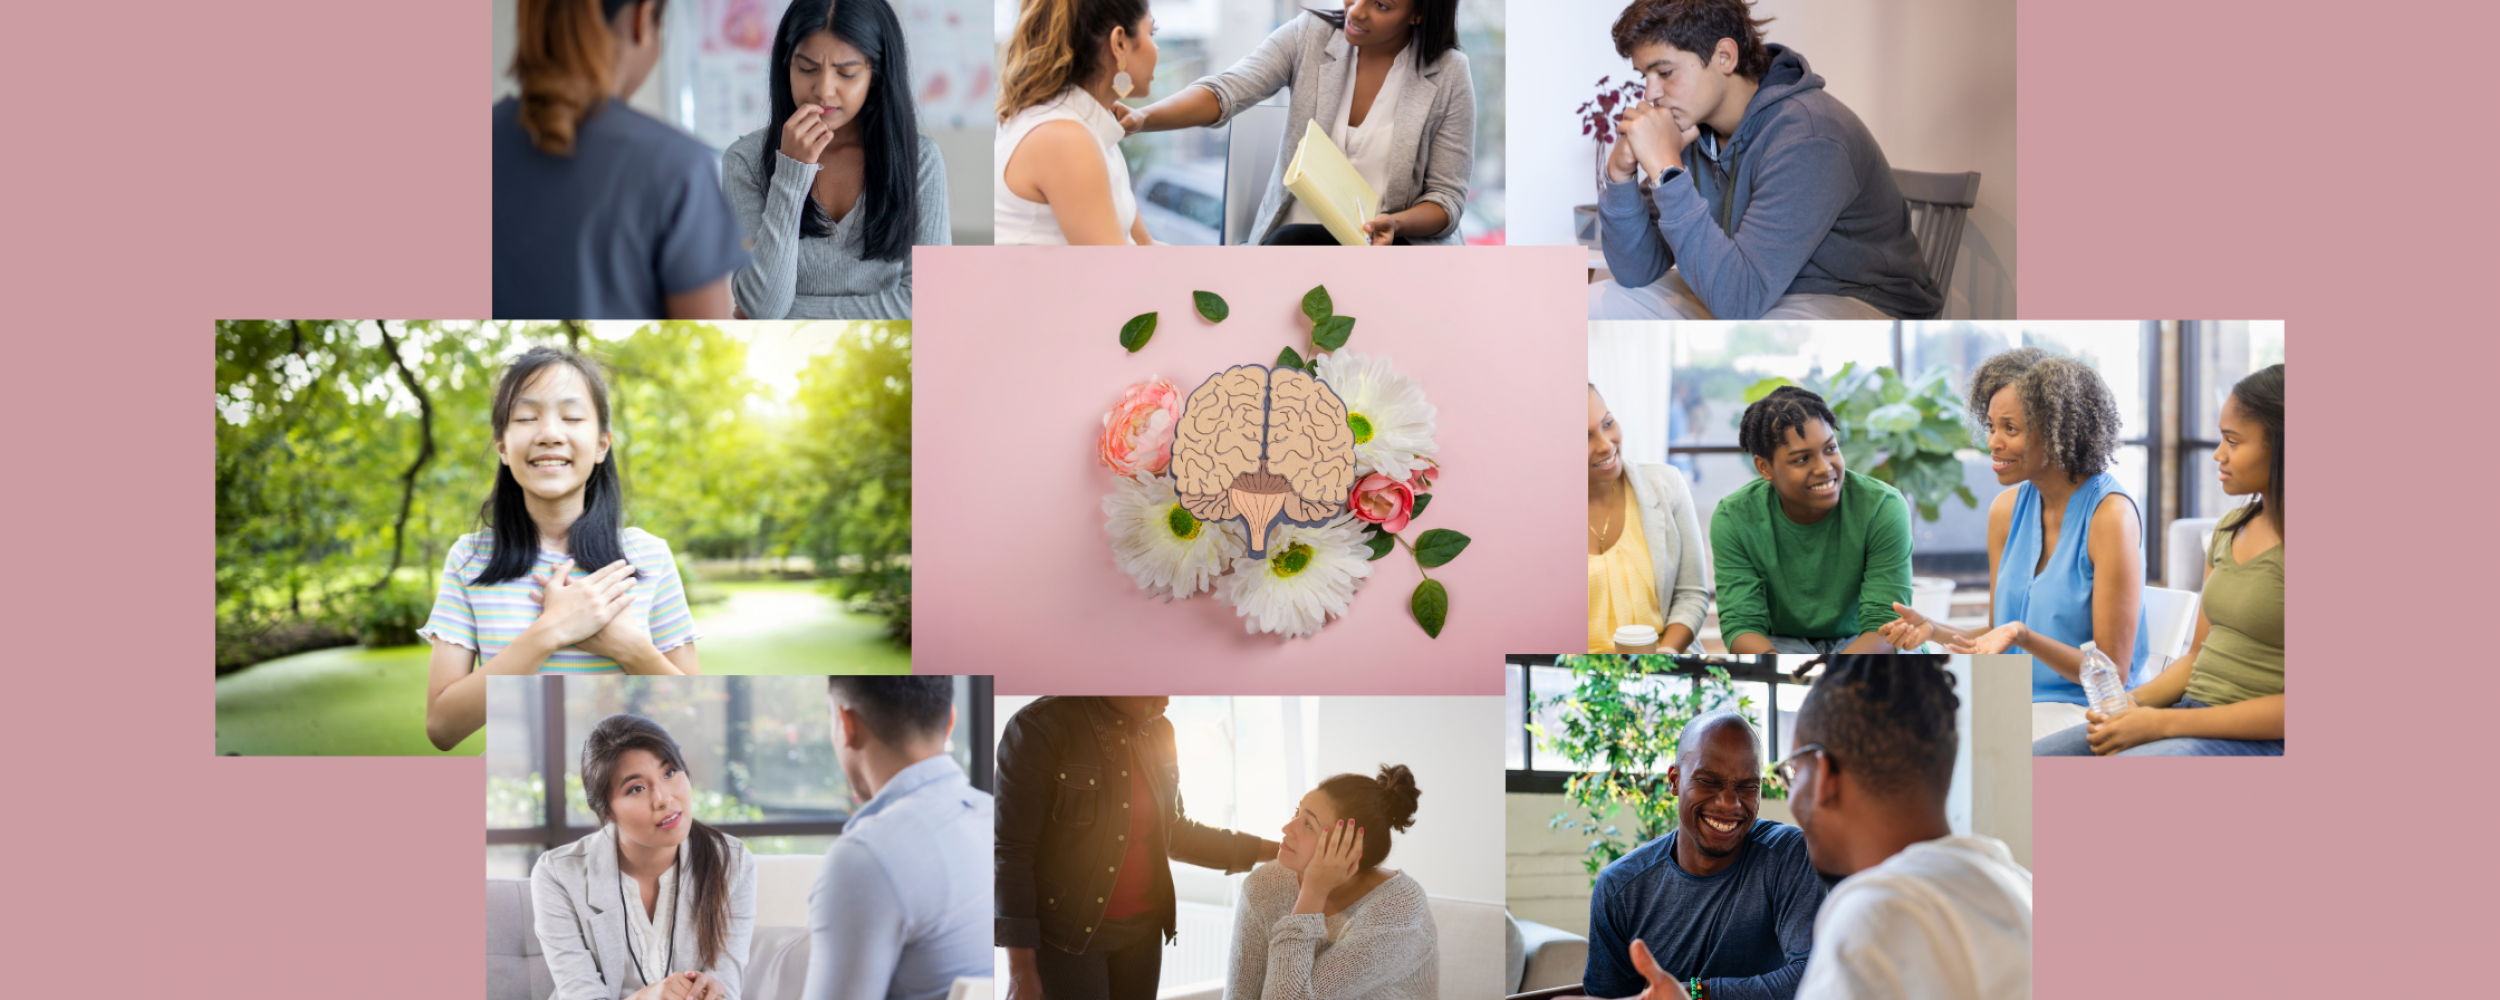 Collage of multicultural groups in mental health scenarios such as support groups and therapy sessions